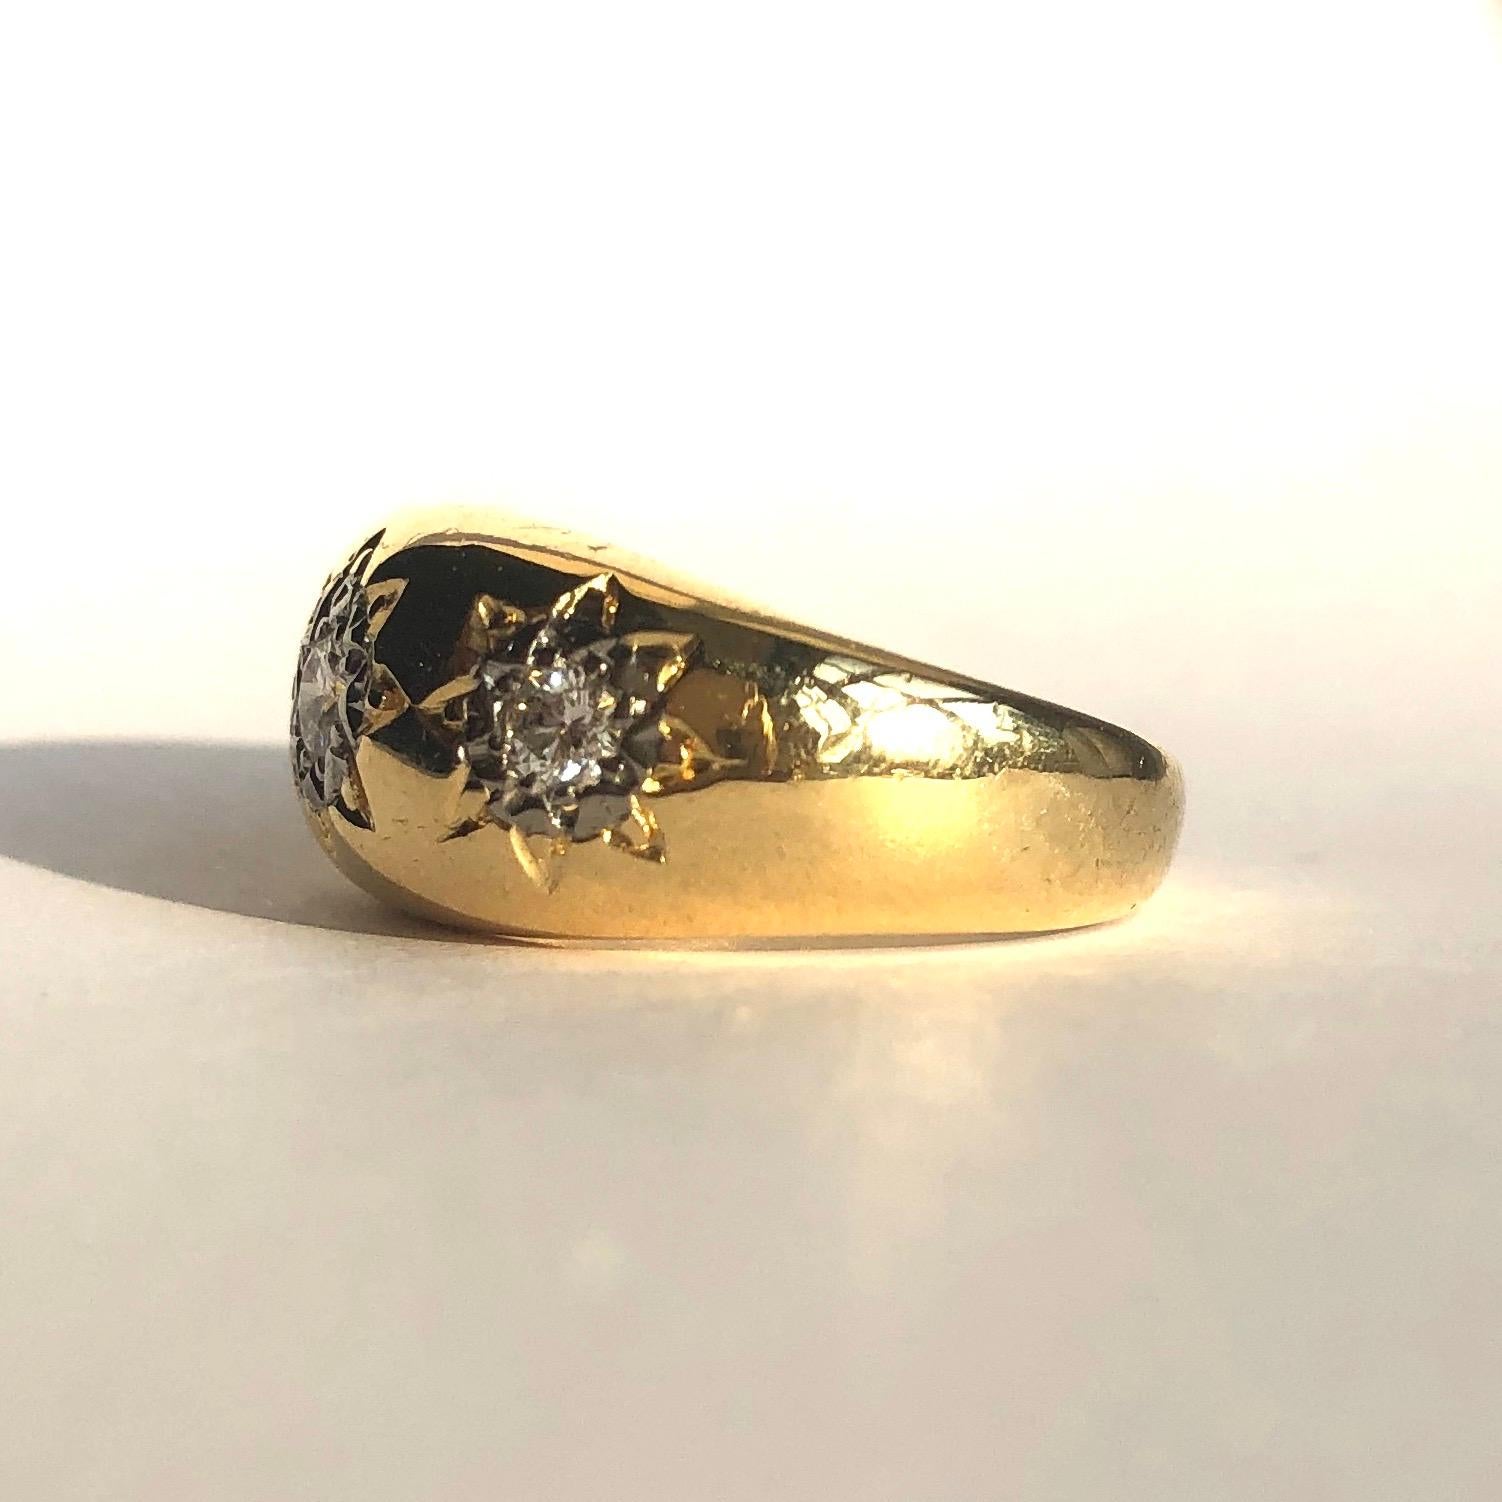 This gold band is gorgeously chunky and wide. The 18ct gold has three stars etched into it and then at the centre is another platinum star setting holding the diamonds. The diamonds total 45pts and are bright and sparkly. 

Ring Size: O or 7
Band